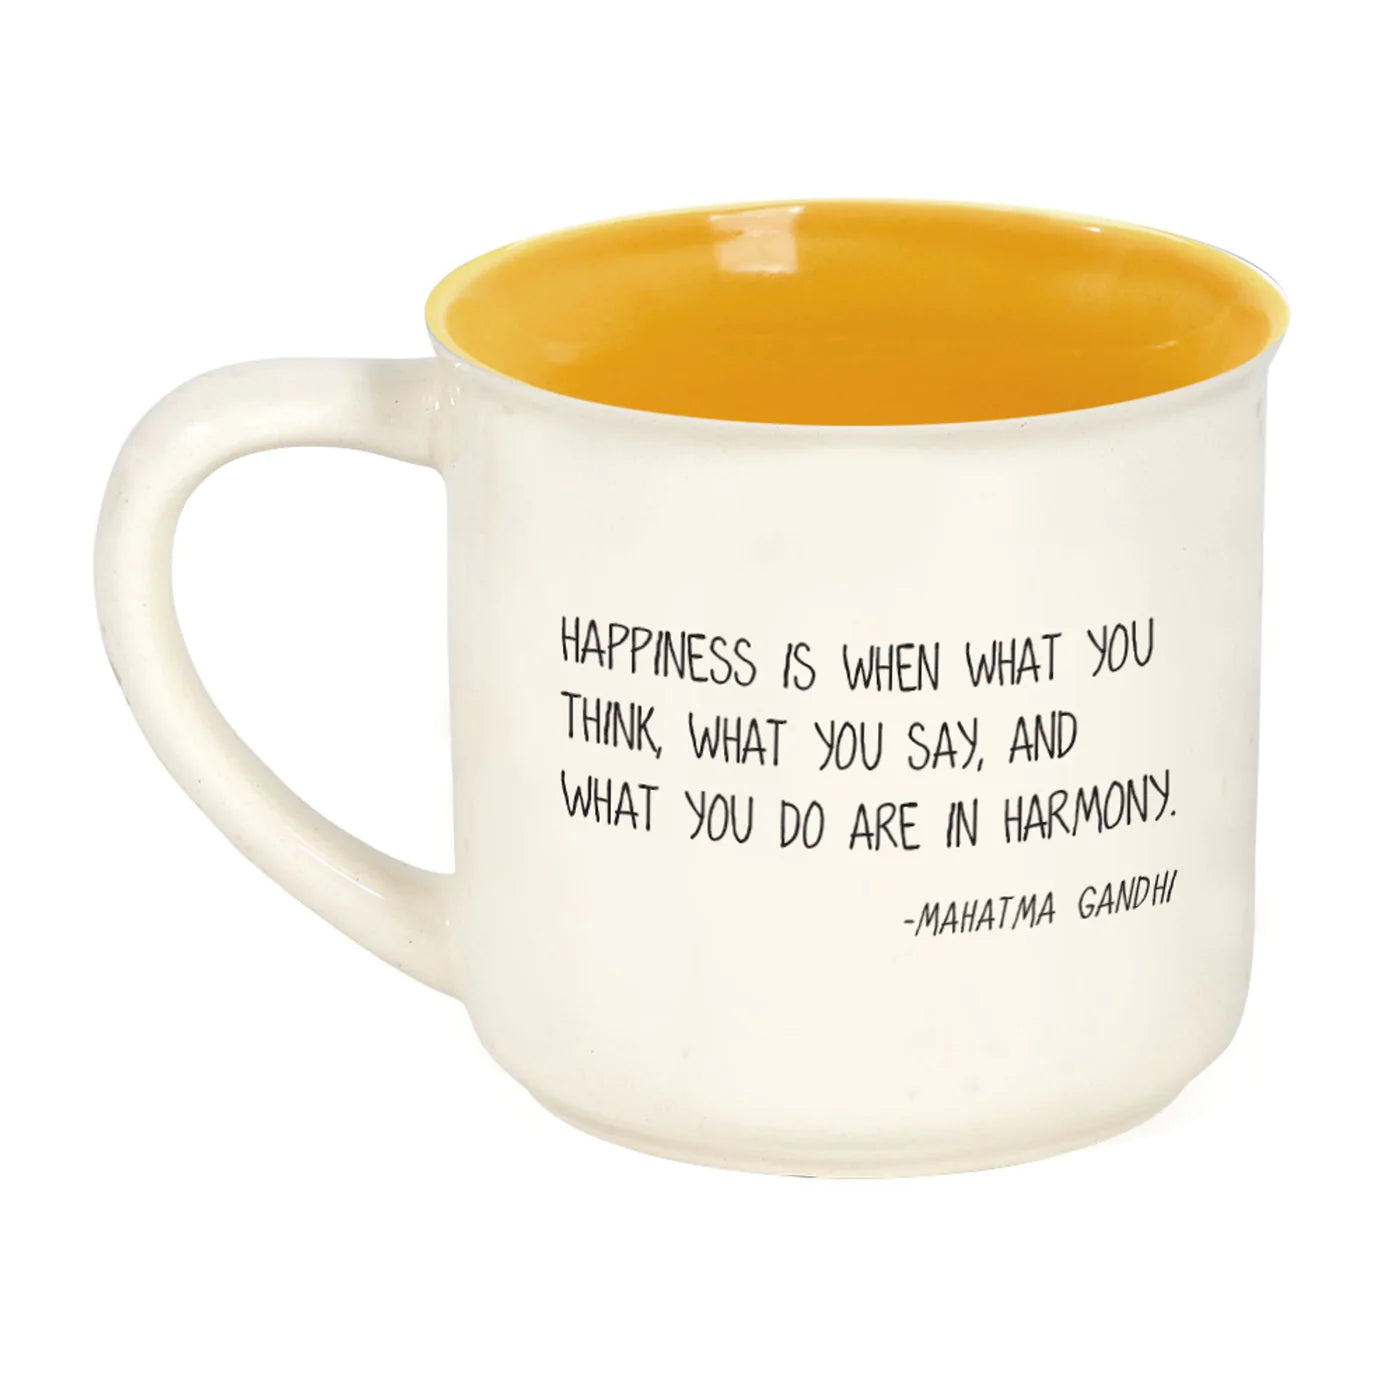 Do More of What Makes You Happy - Lake Norman Gifts